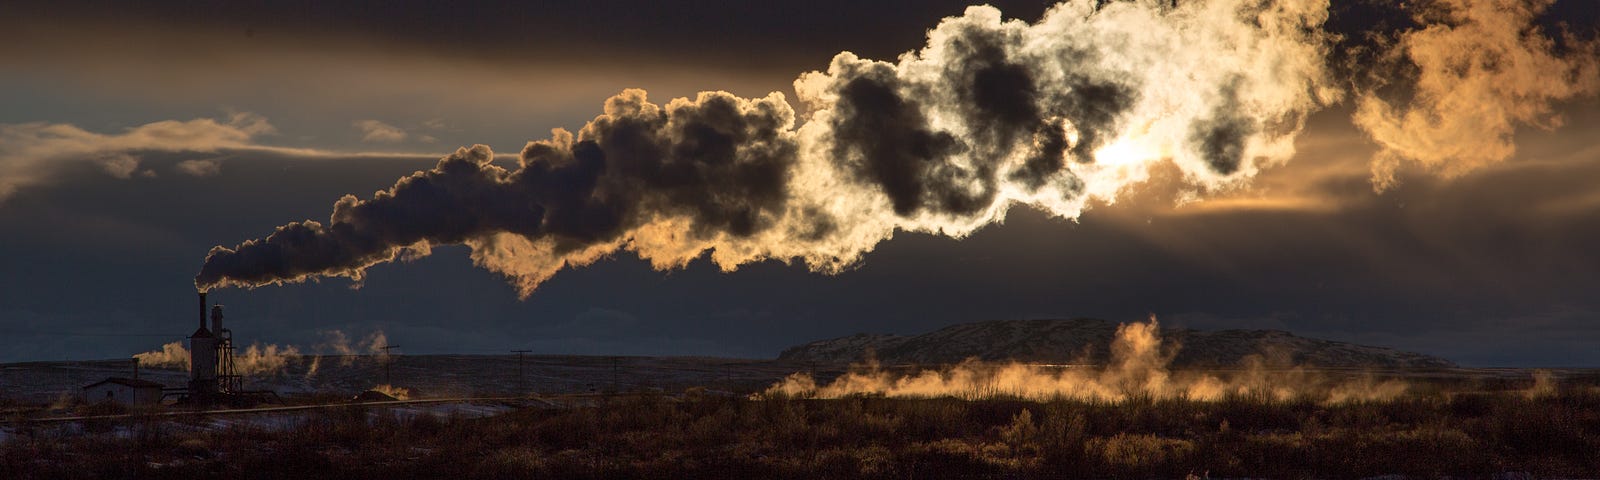 A factory exhaust pipe emits smoke over the land. The sun peers through the clouds of smoke.